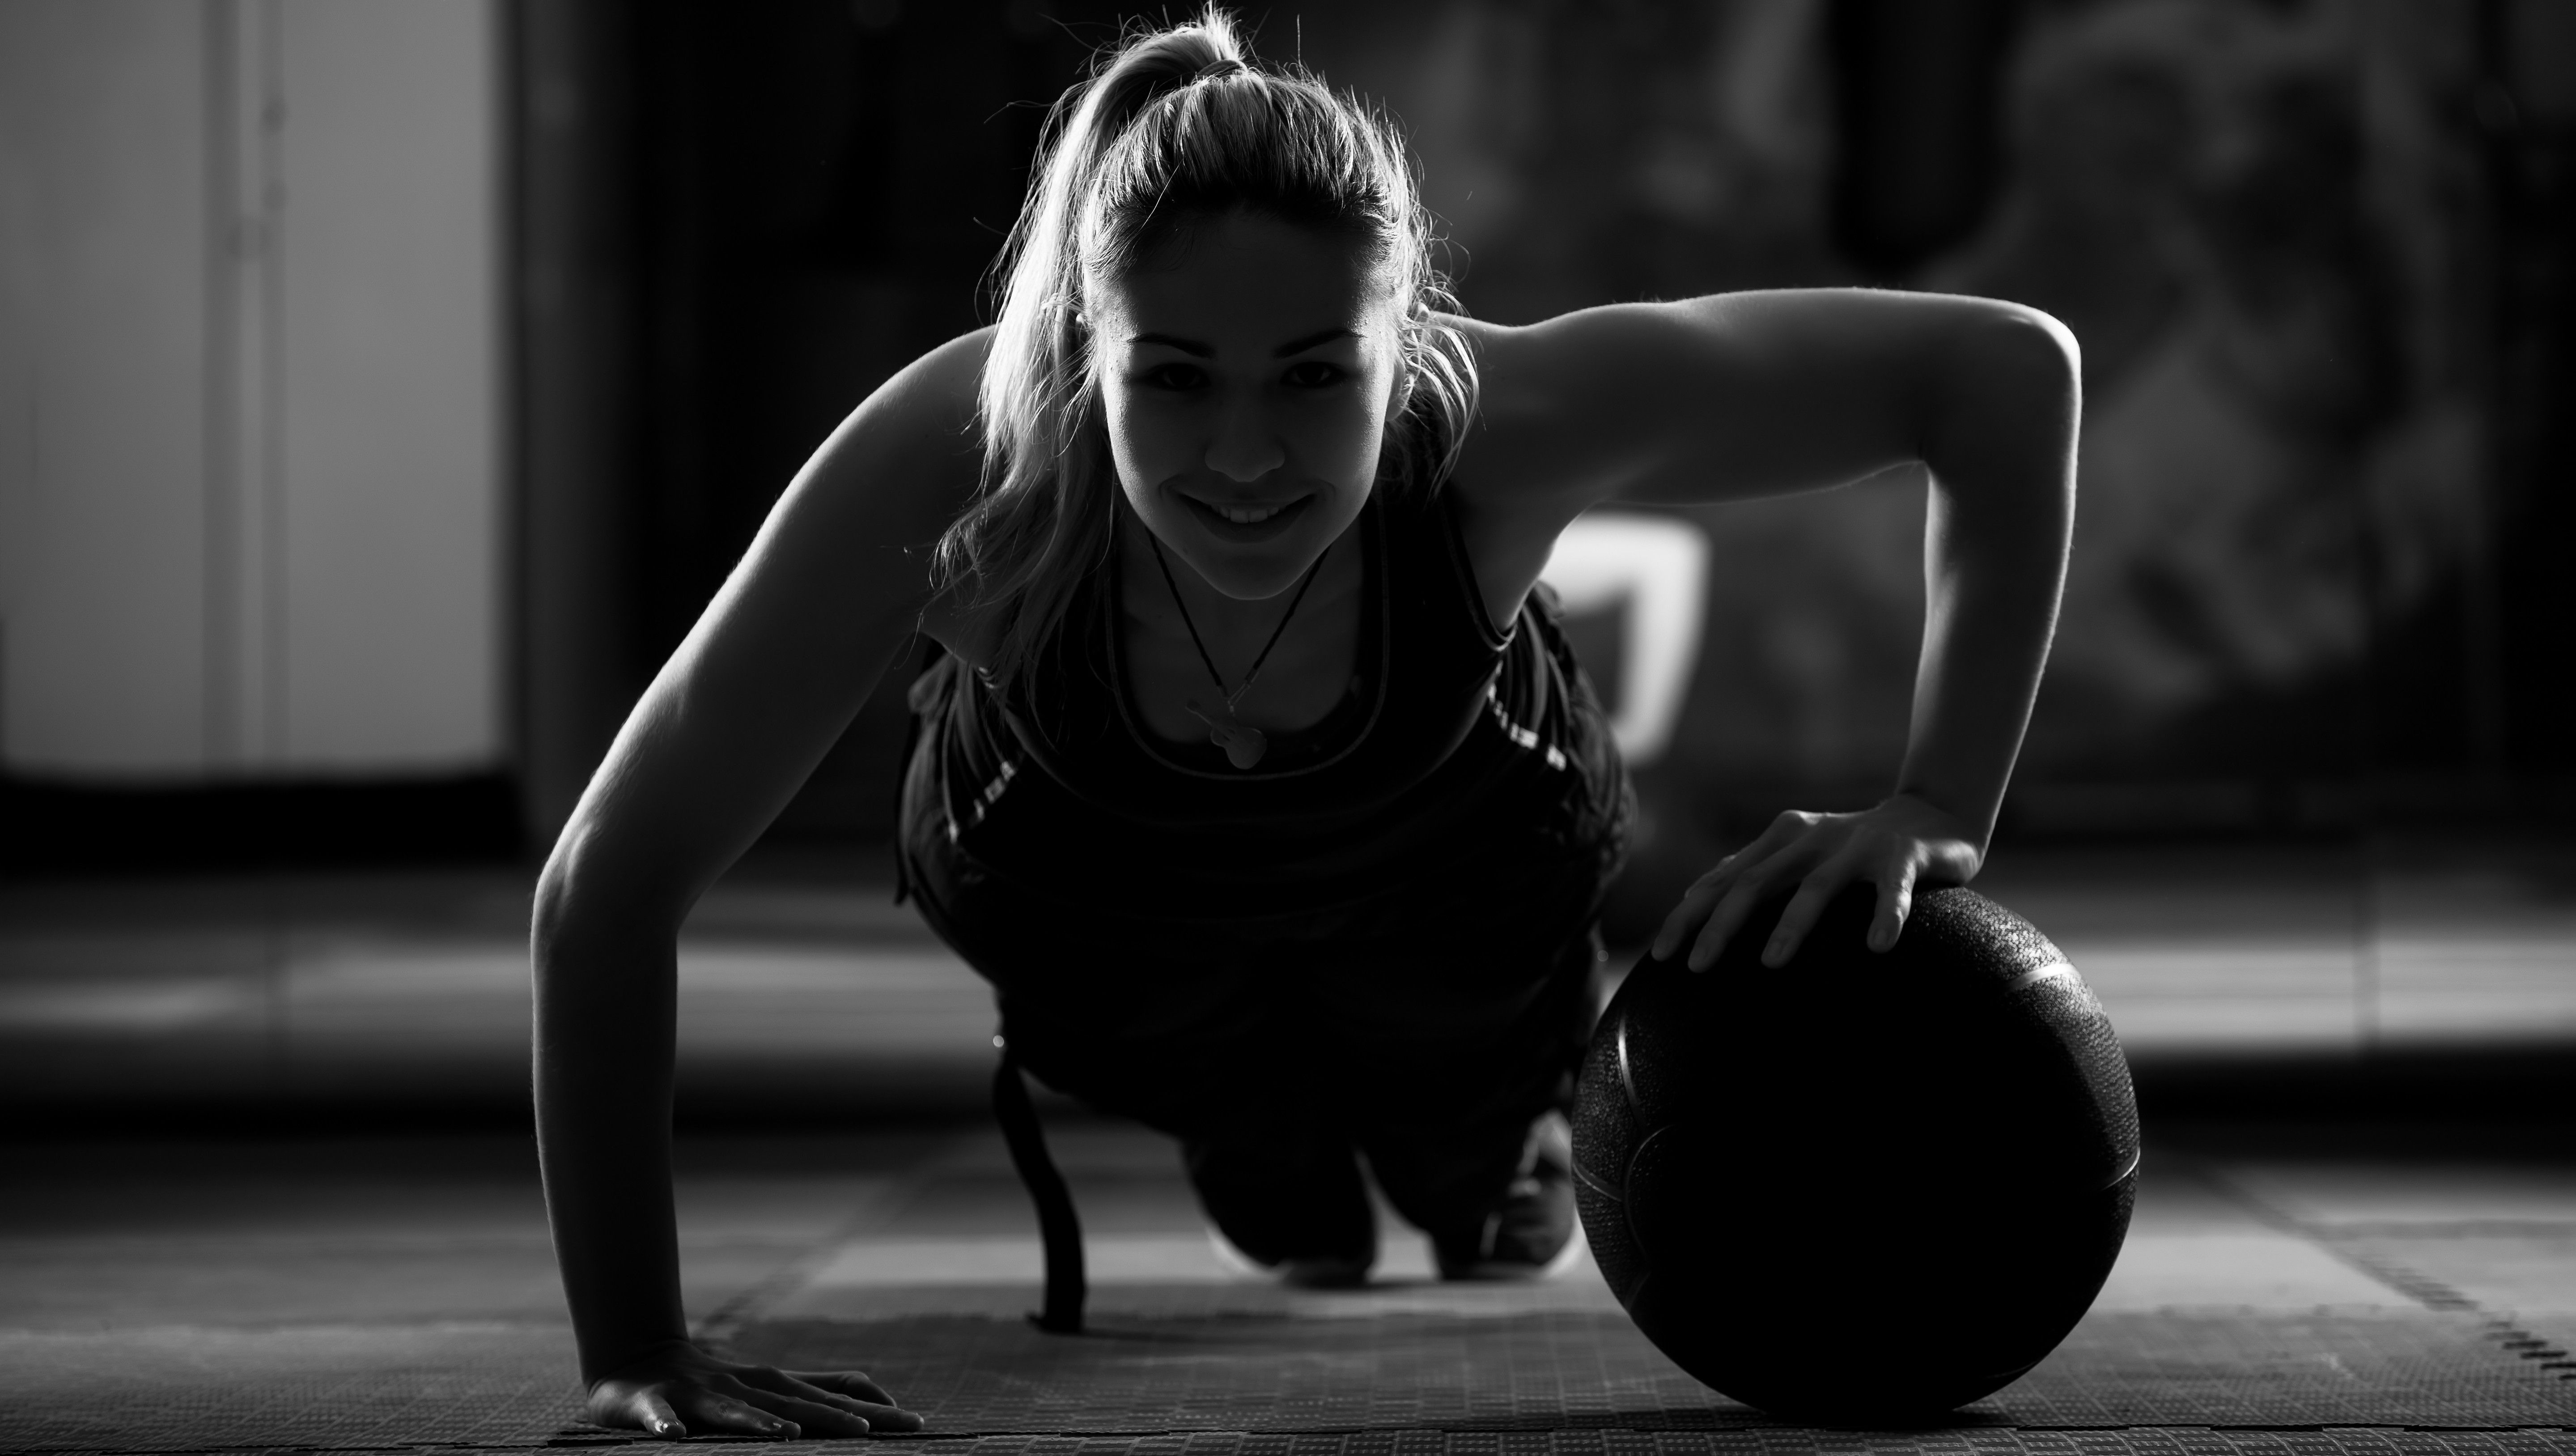 Woman Working Out Black And White Wallpaper